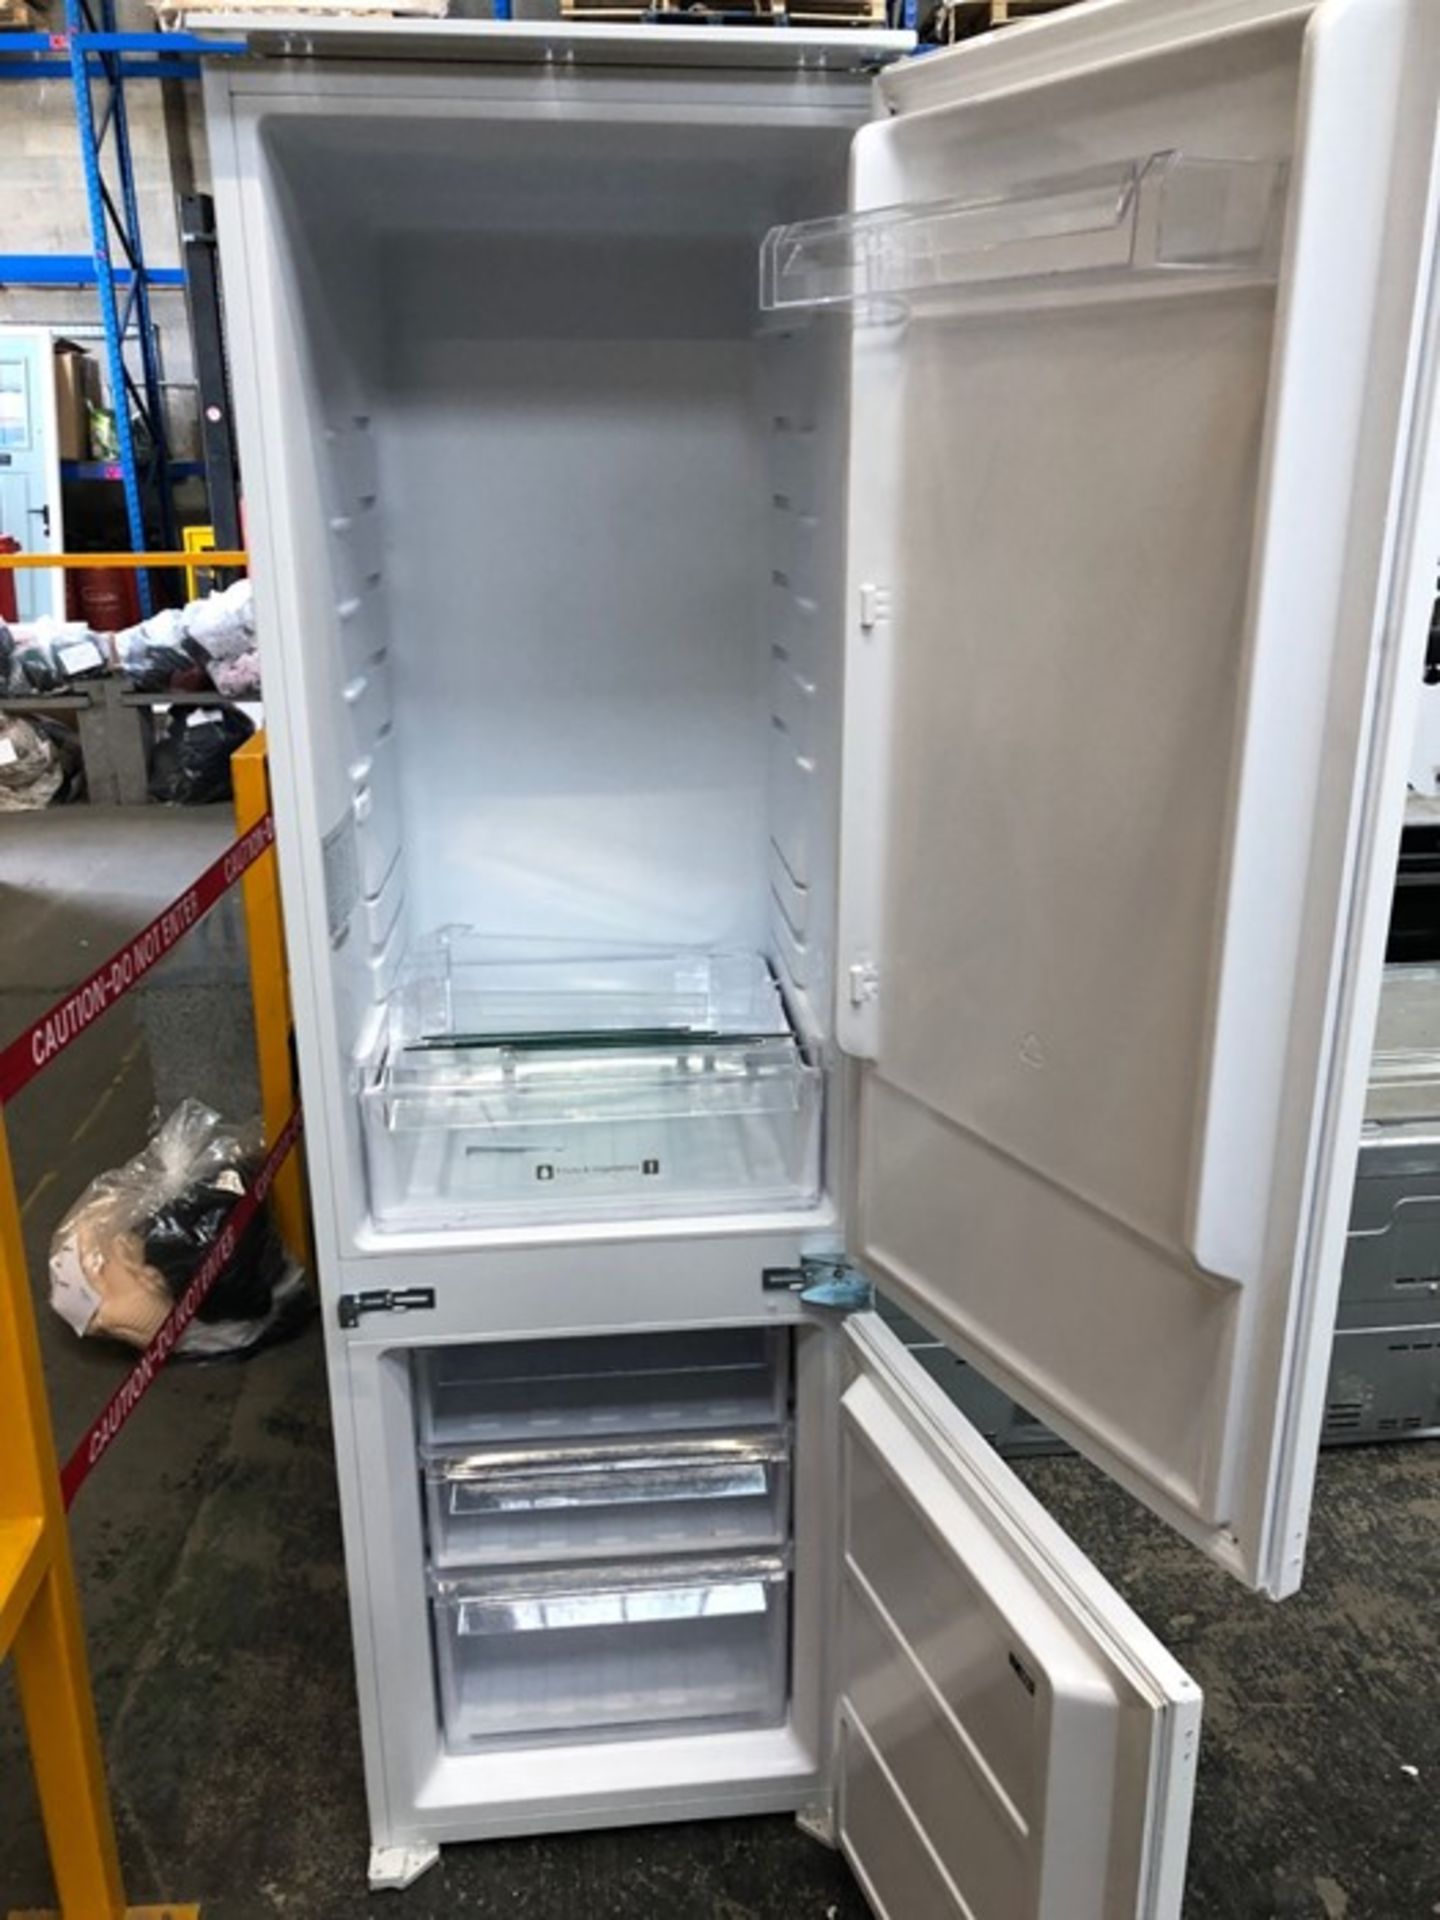 CULINA UBBIFF70L INTERGRATED FRIDGE FREEZER / UNTESTED. APPEARS TO BE LIGHTLY USED. GENERAL WEAR AND - Image 2 of 2